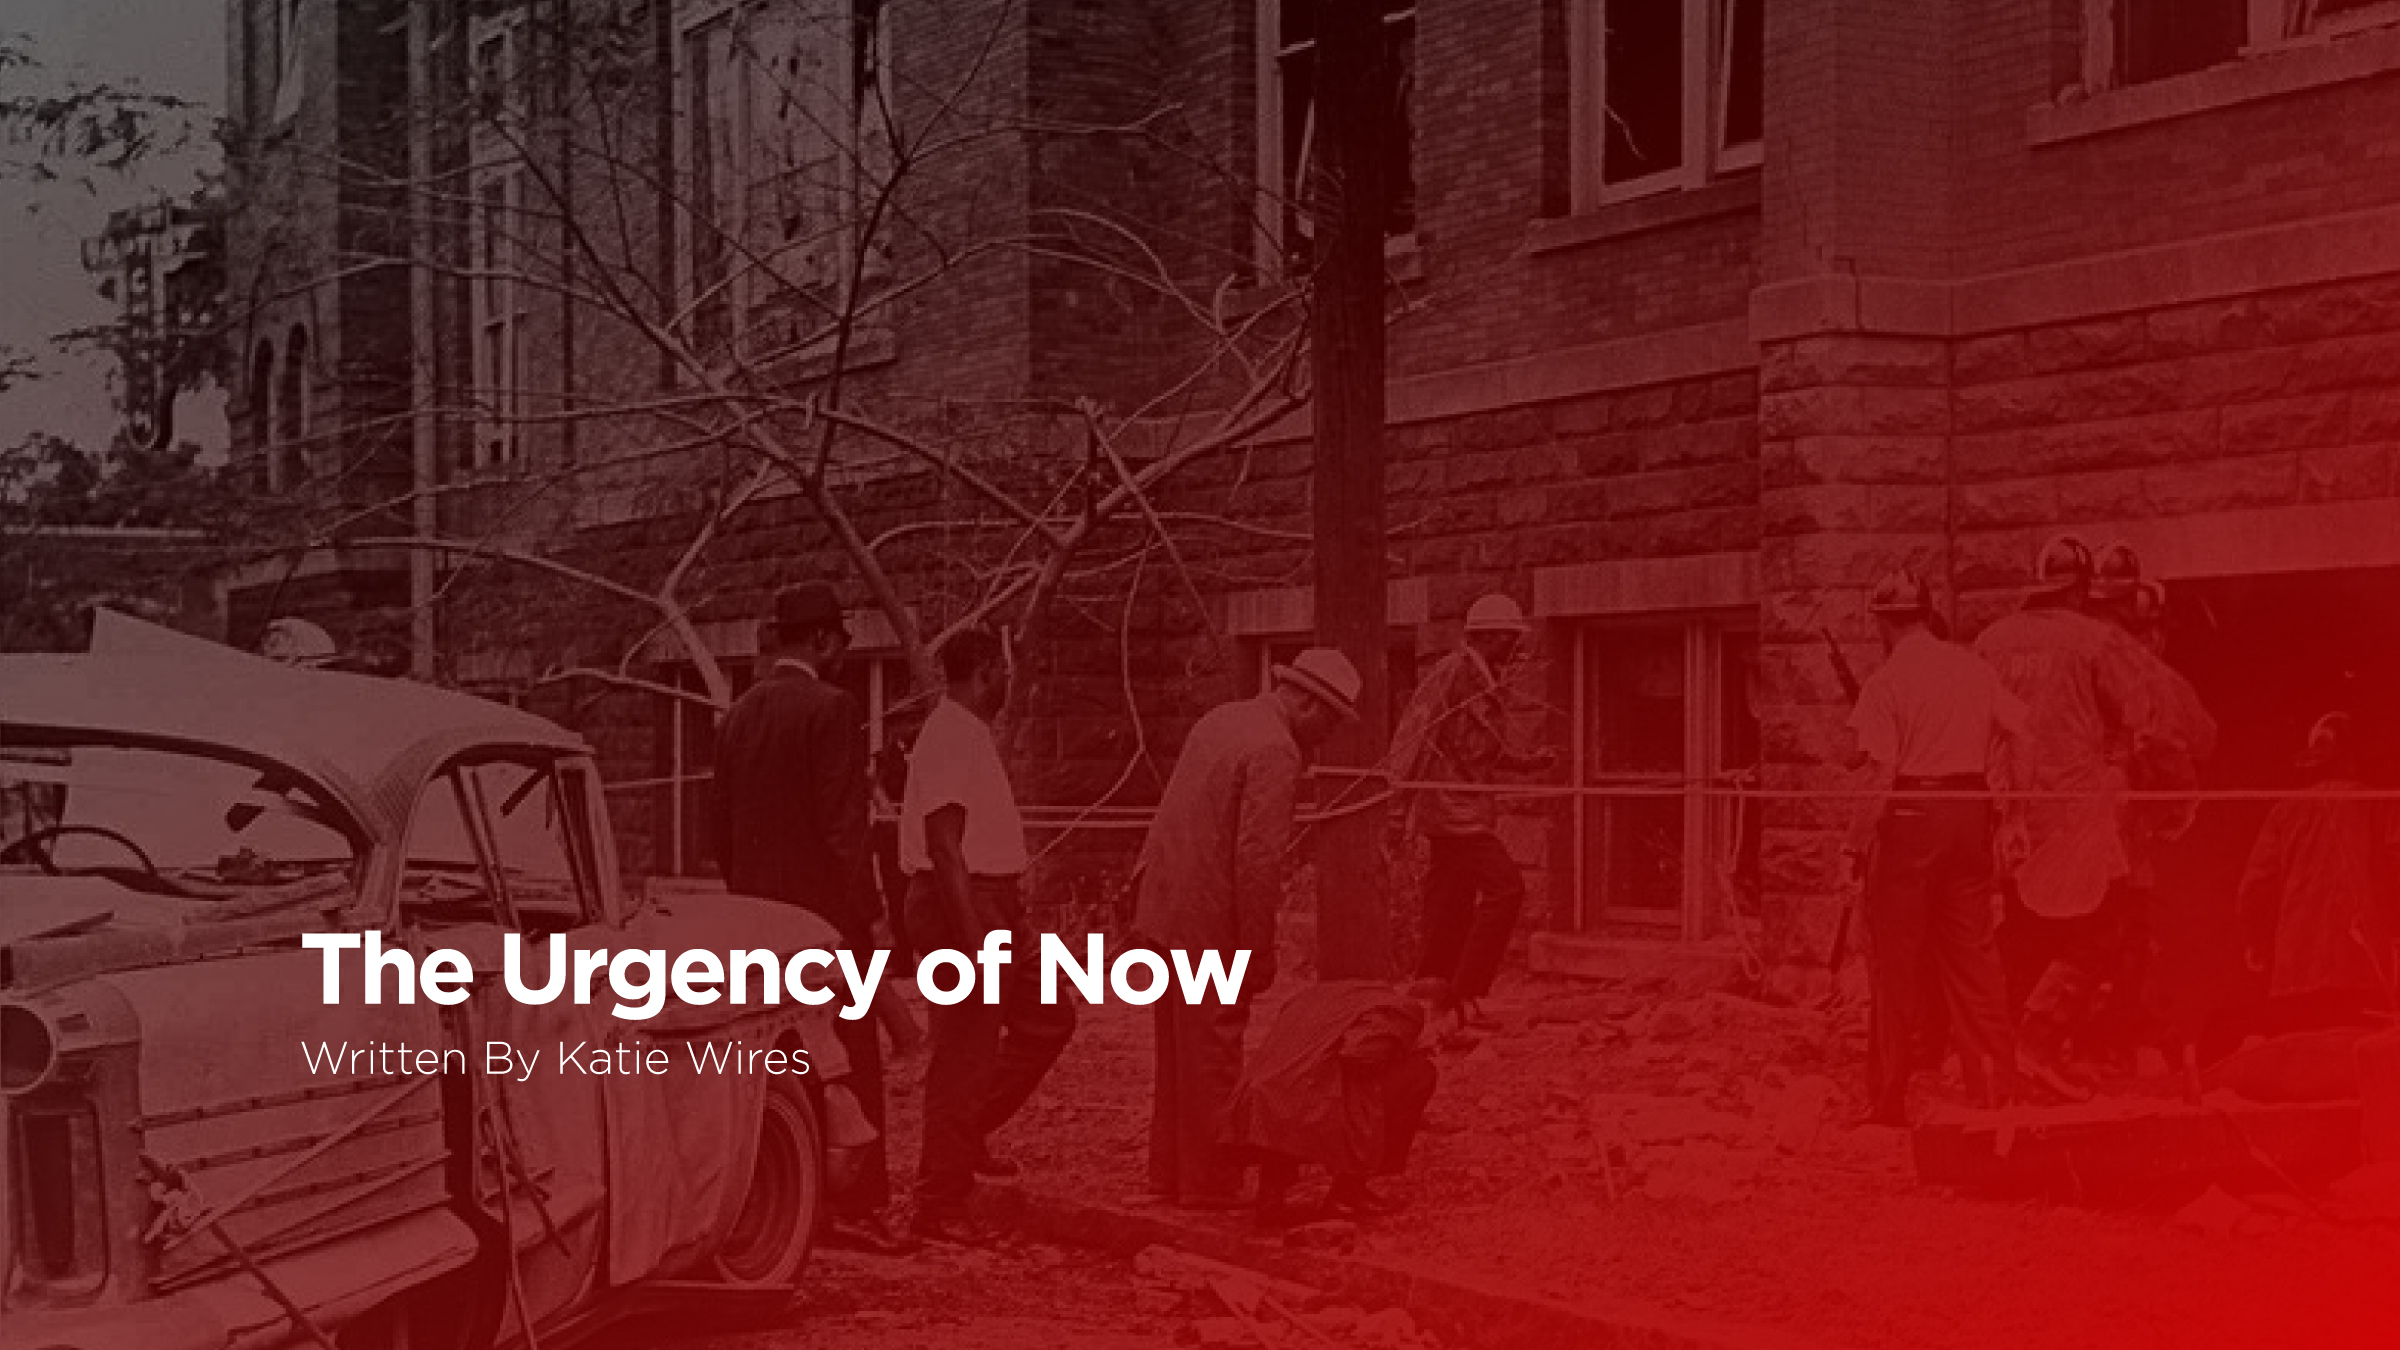 The Urgency of Now